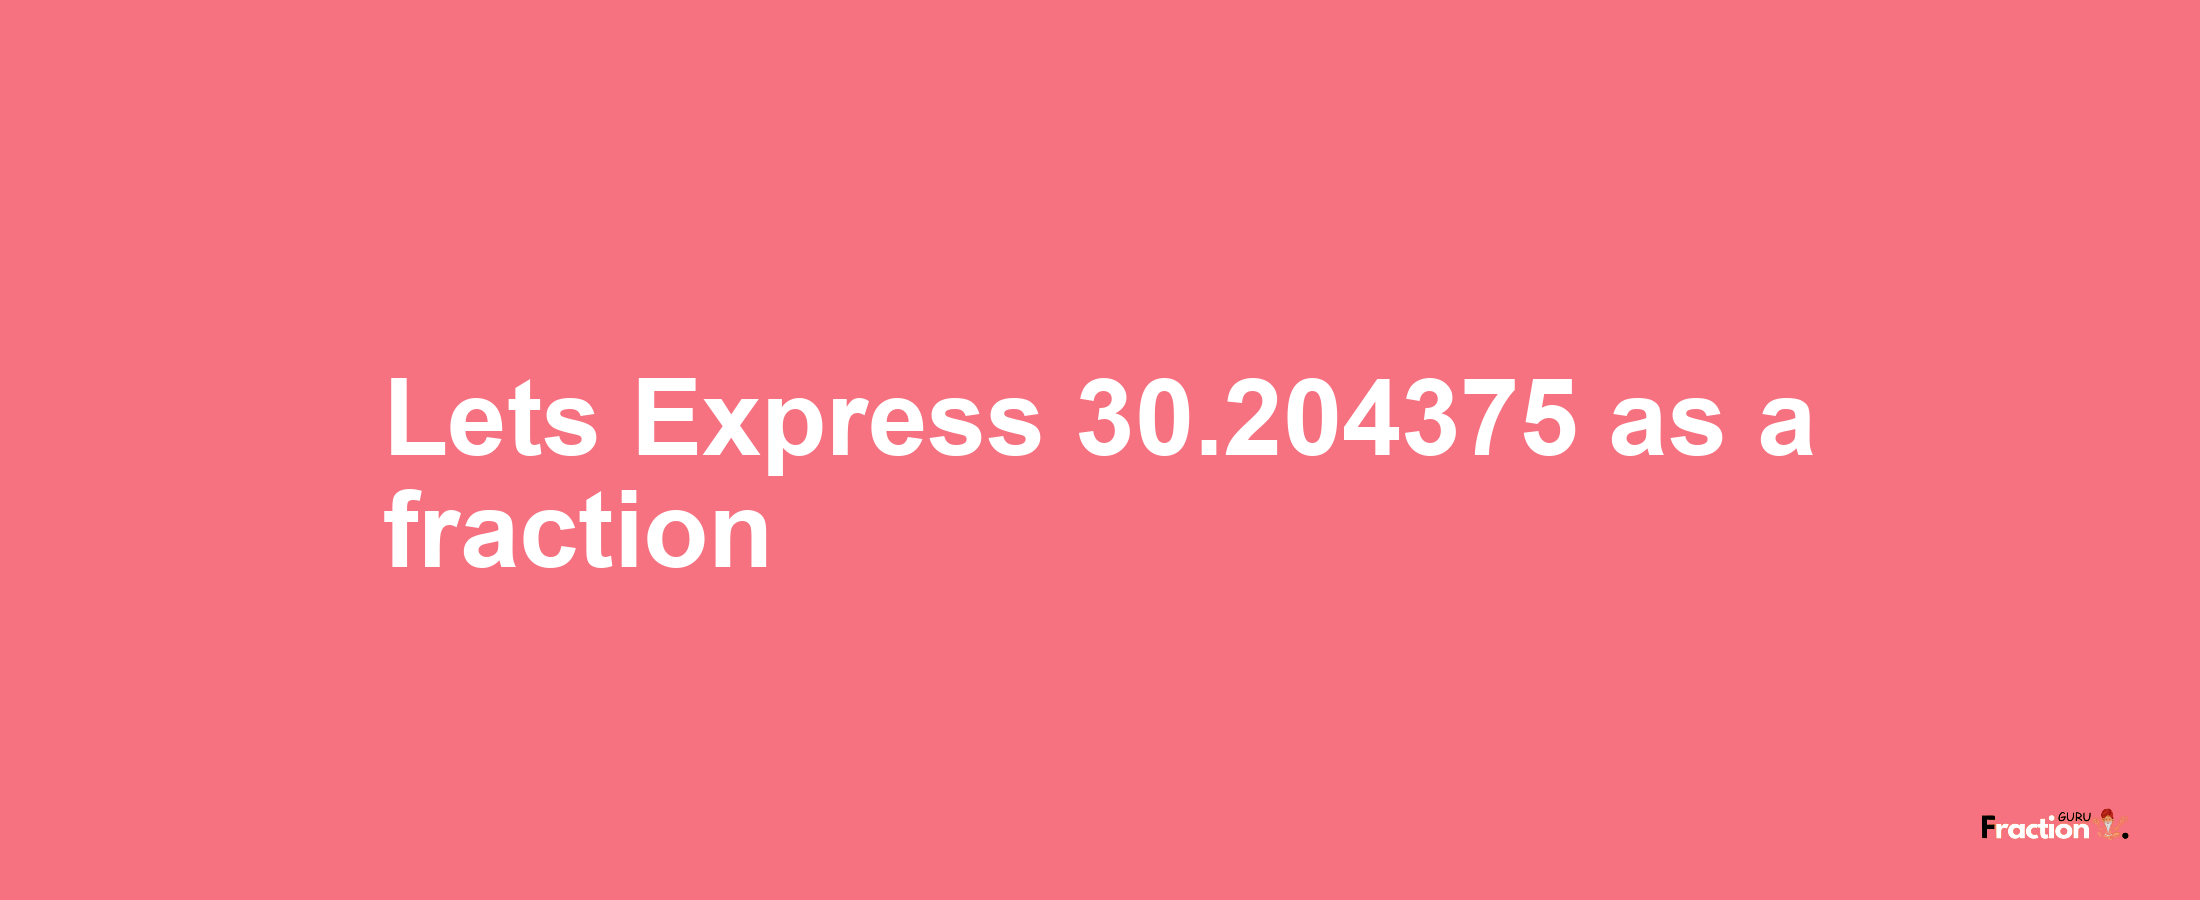 Lets Express 30.204375 as afraction